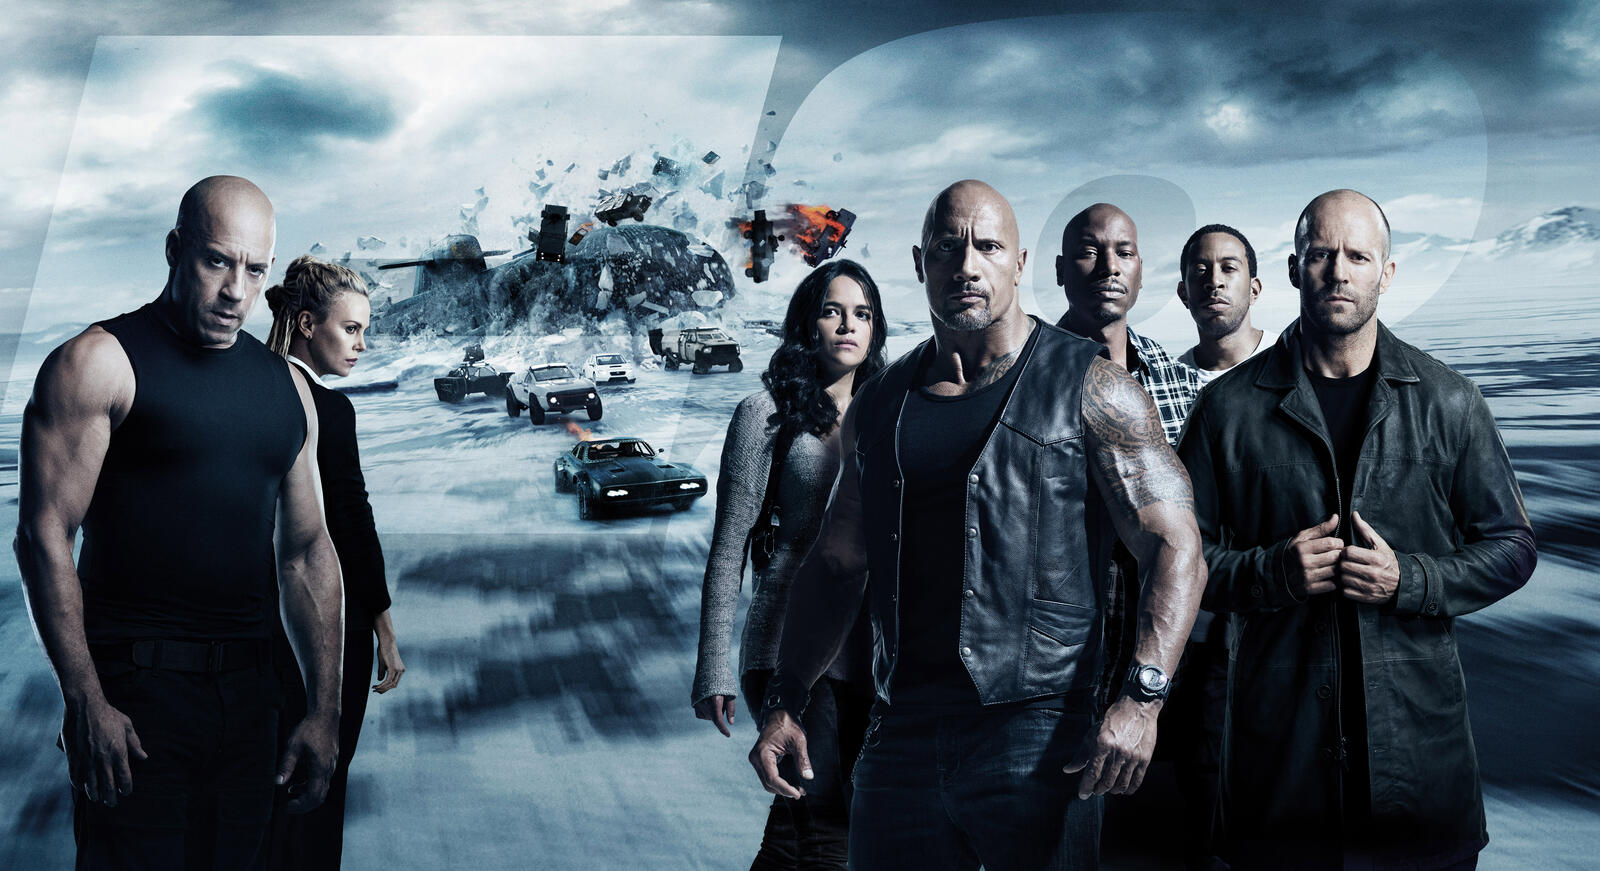 Wallpapers The Fate Of The Furious Fast 8 fast and furious on the desktop